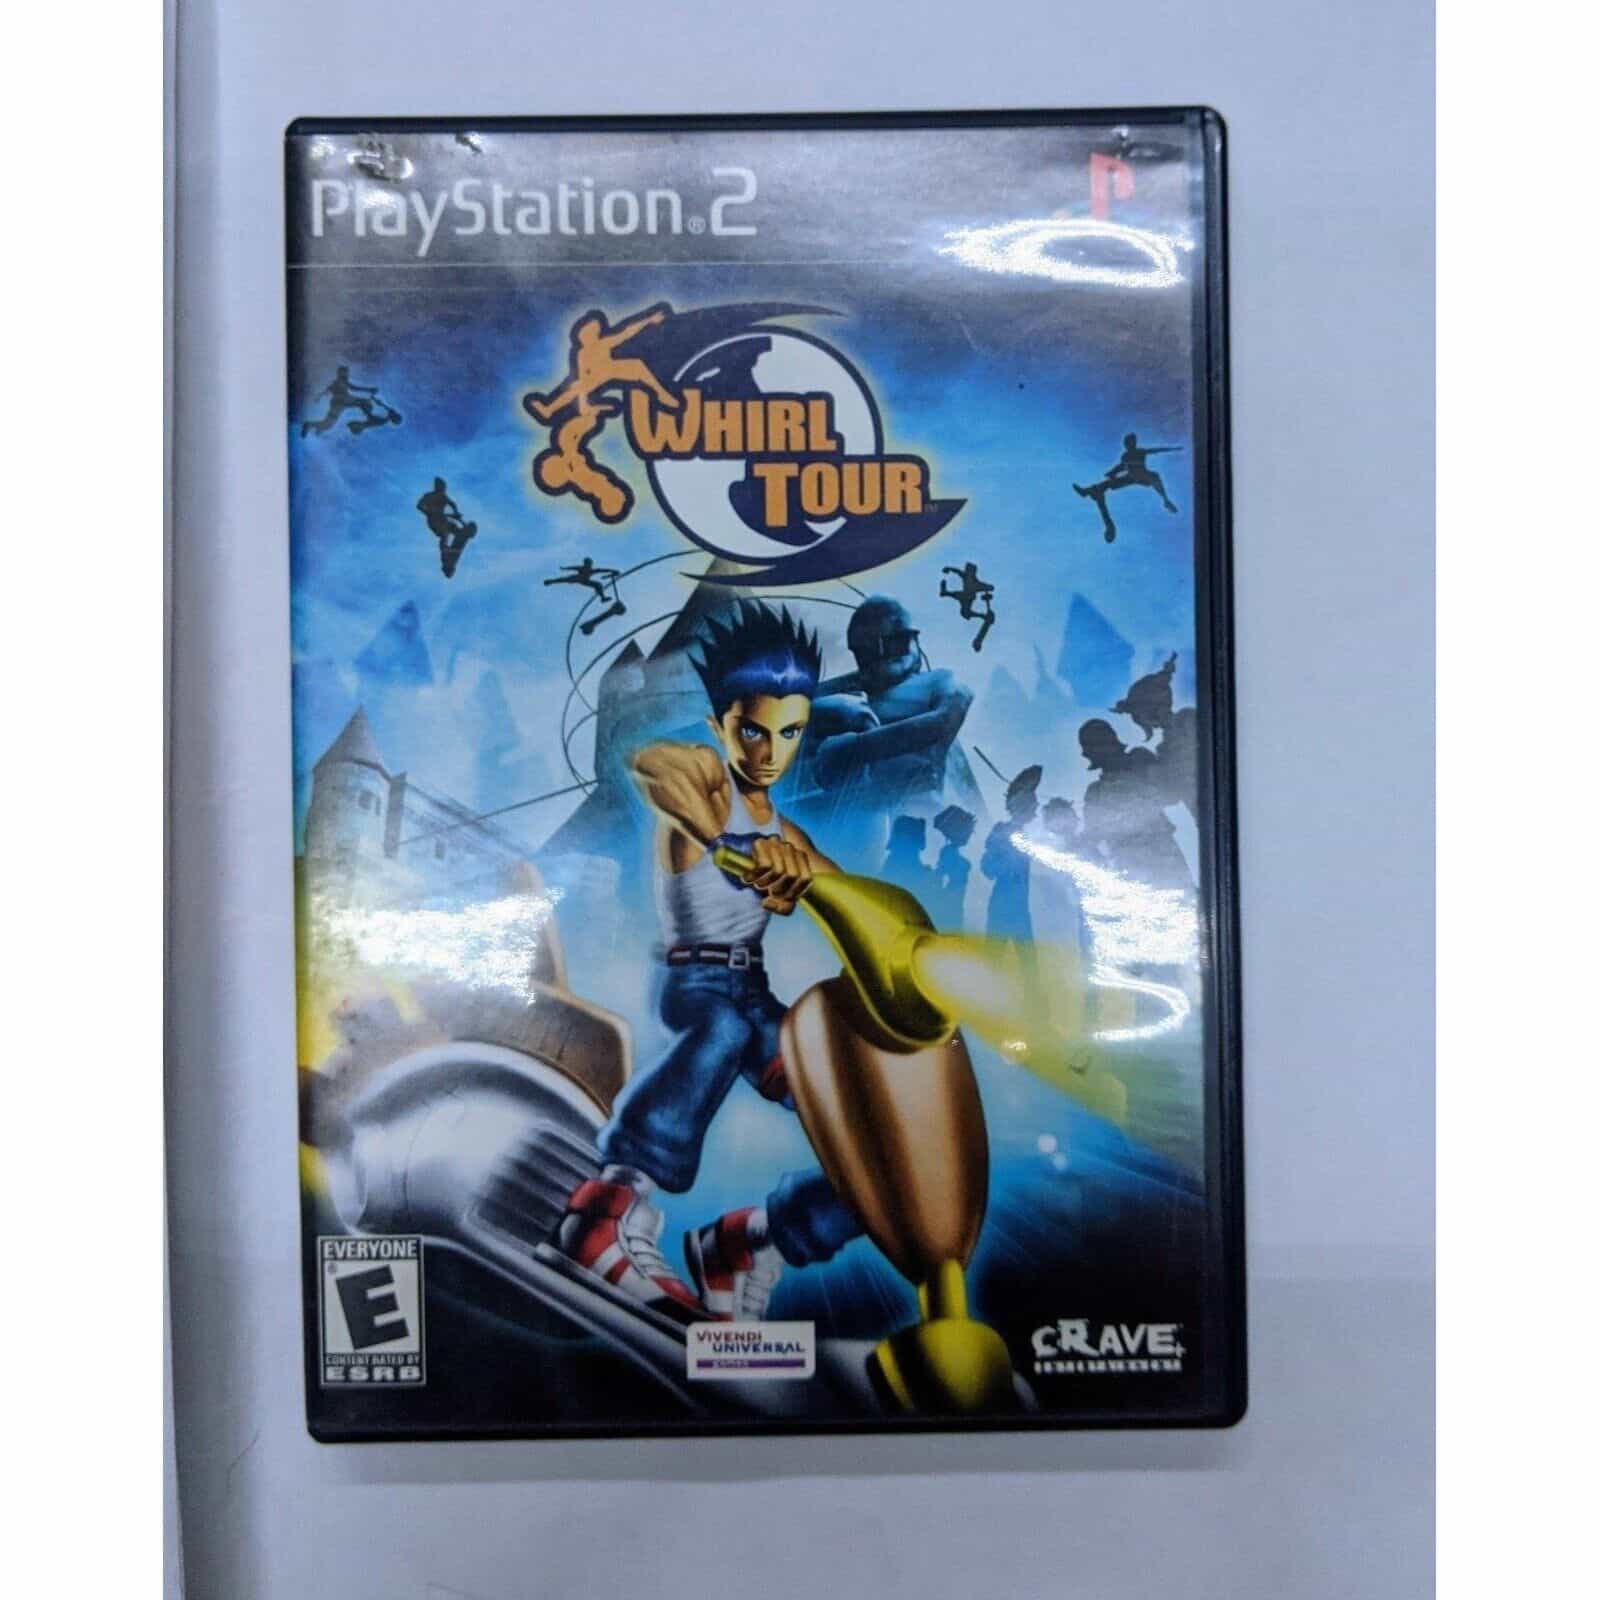 Whirl Tour Playstation 2 Game